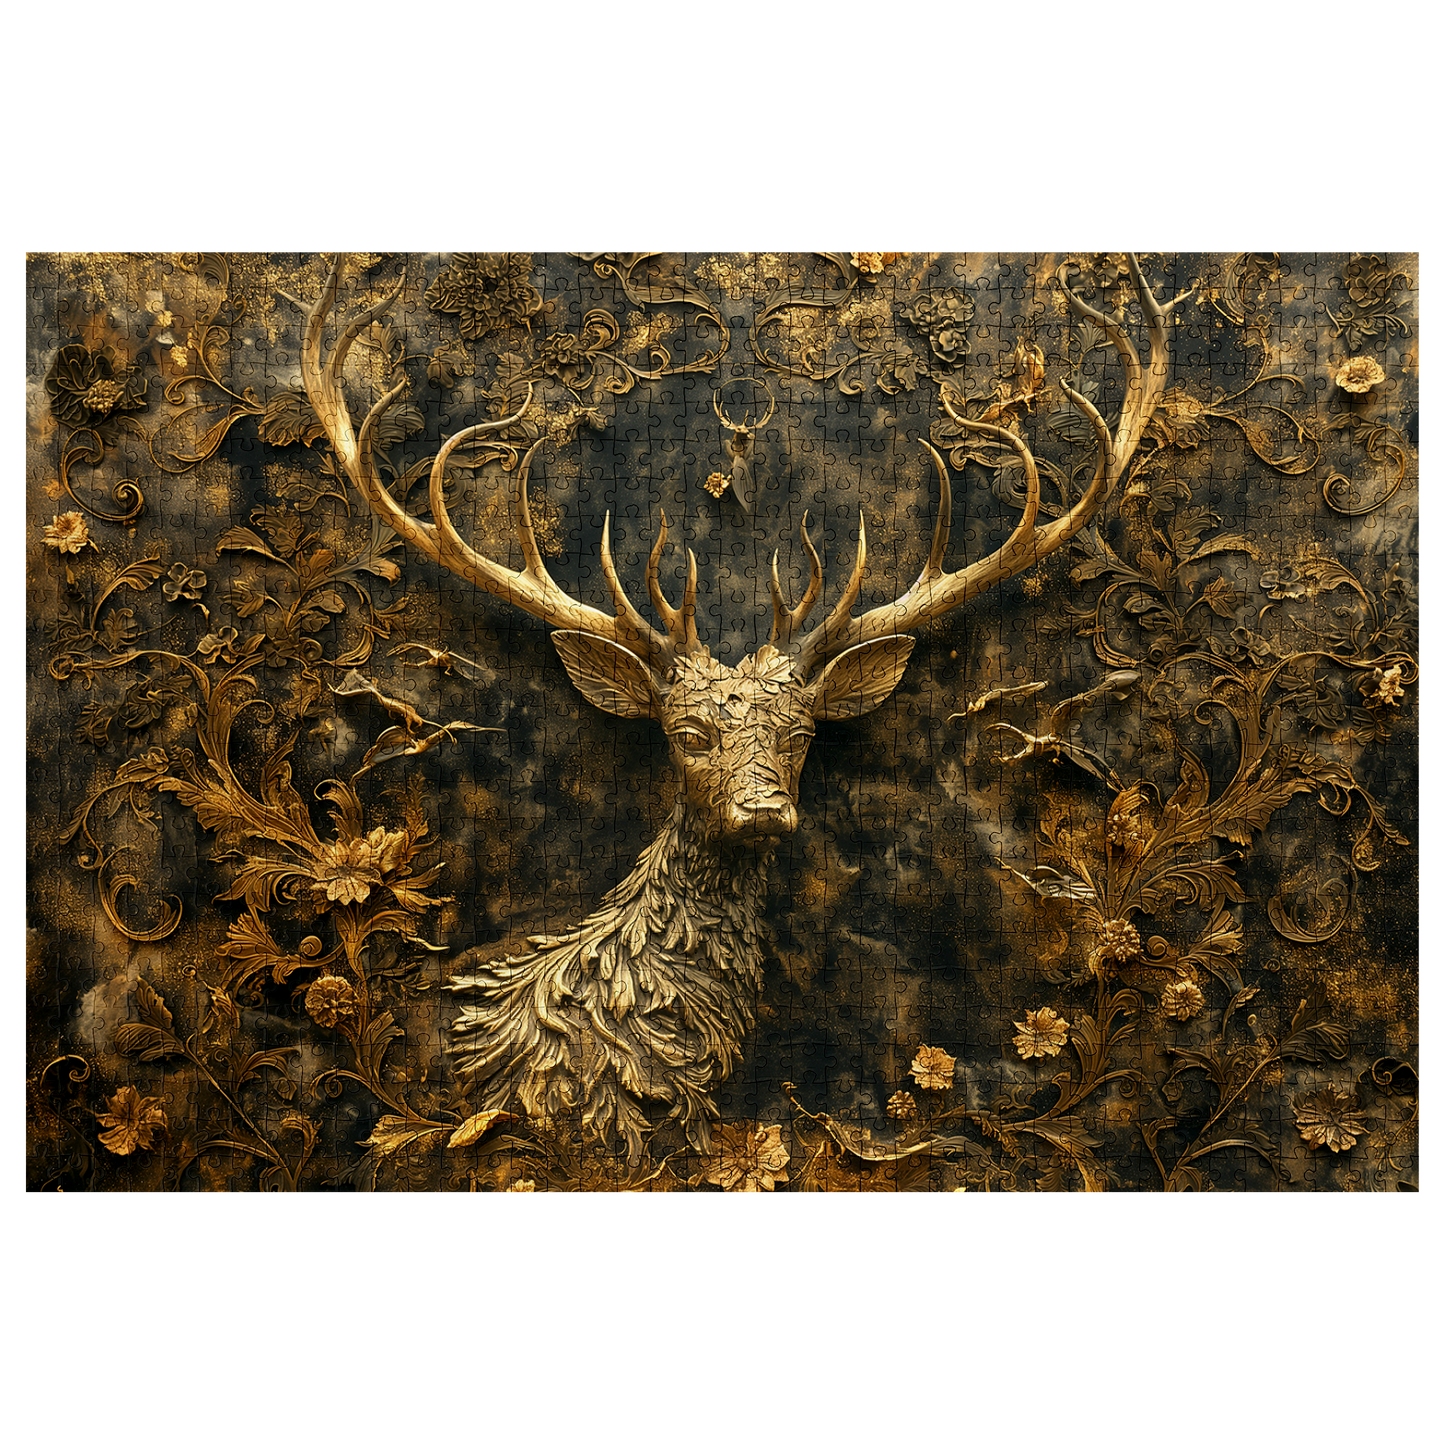 Golden Stag - Premium Jigsaw Puzzle - Veradnt, Majestic, Gilded, Ornate - Multiple Sizes Available